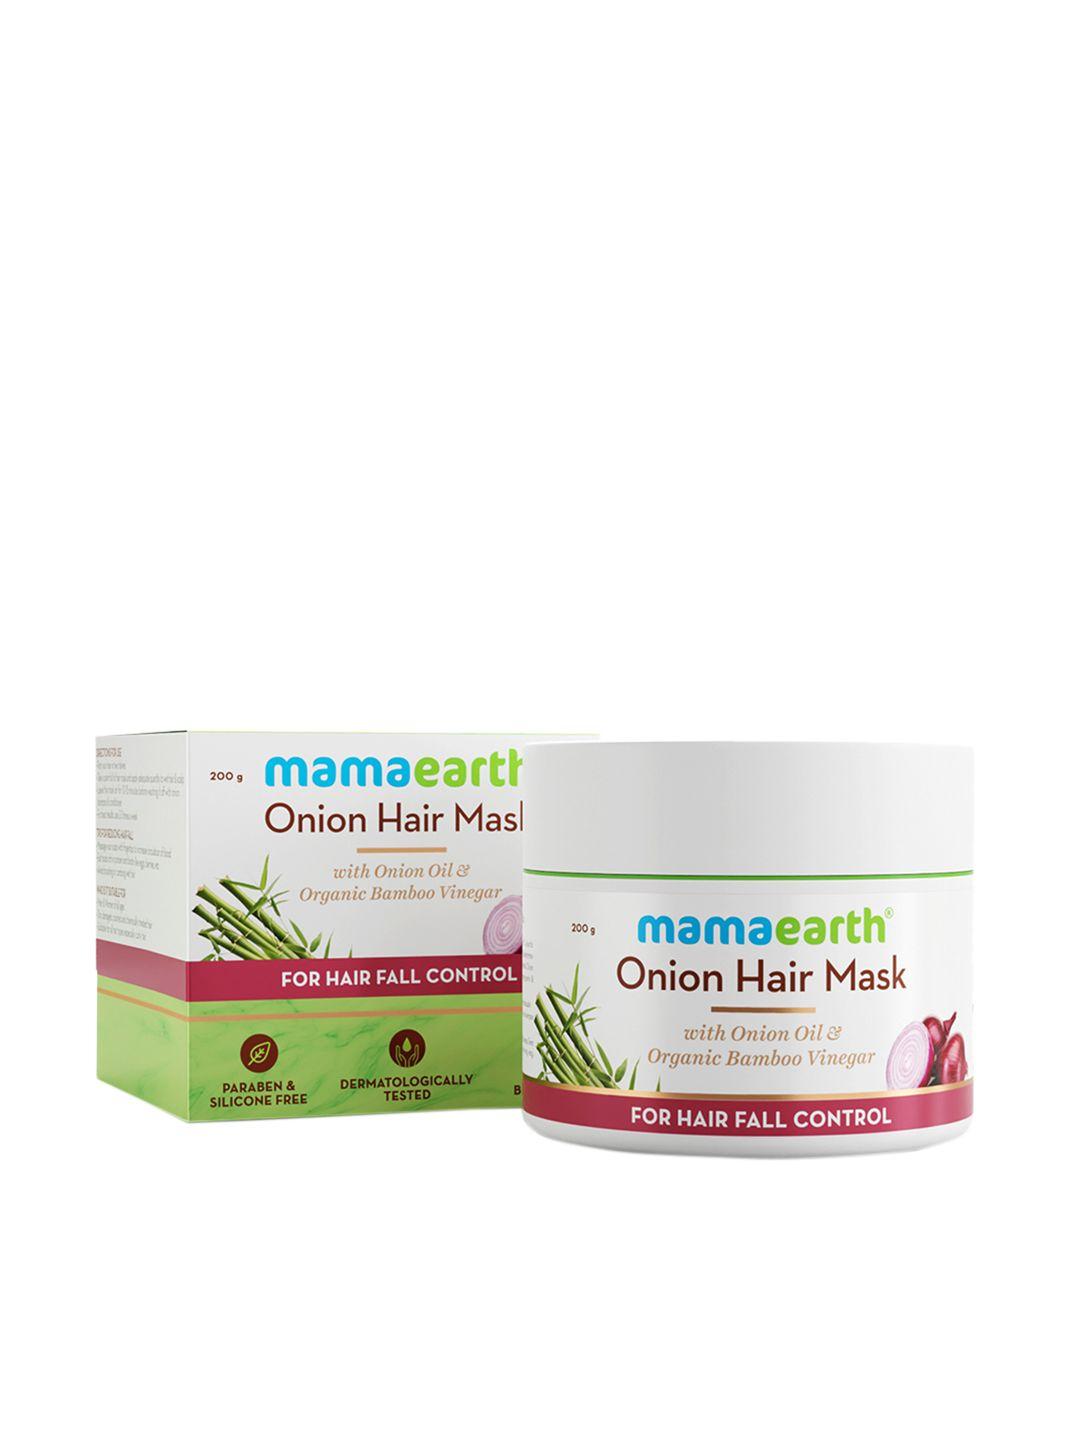 mamaearth onion oil & organic bamboo vinegar sustainable mask for dry & frizzy hair 200 ml